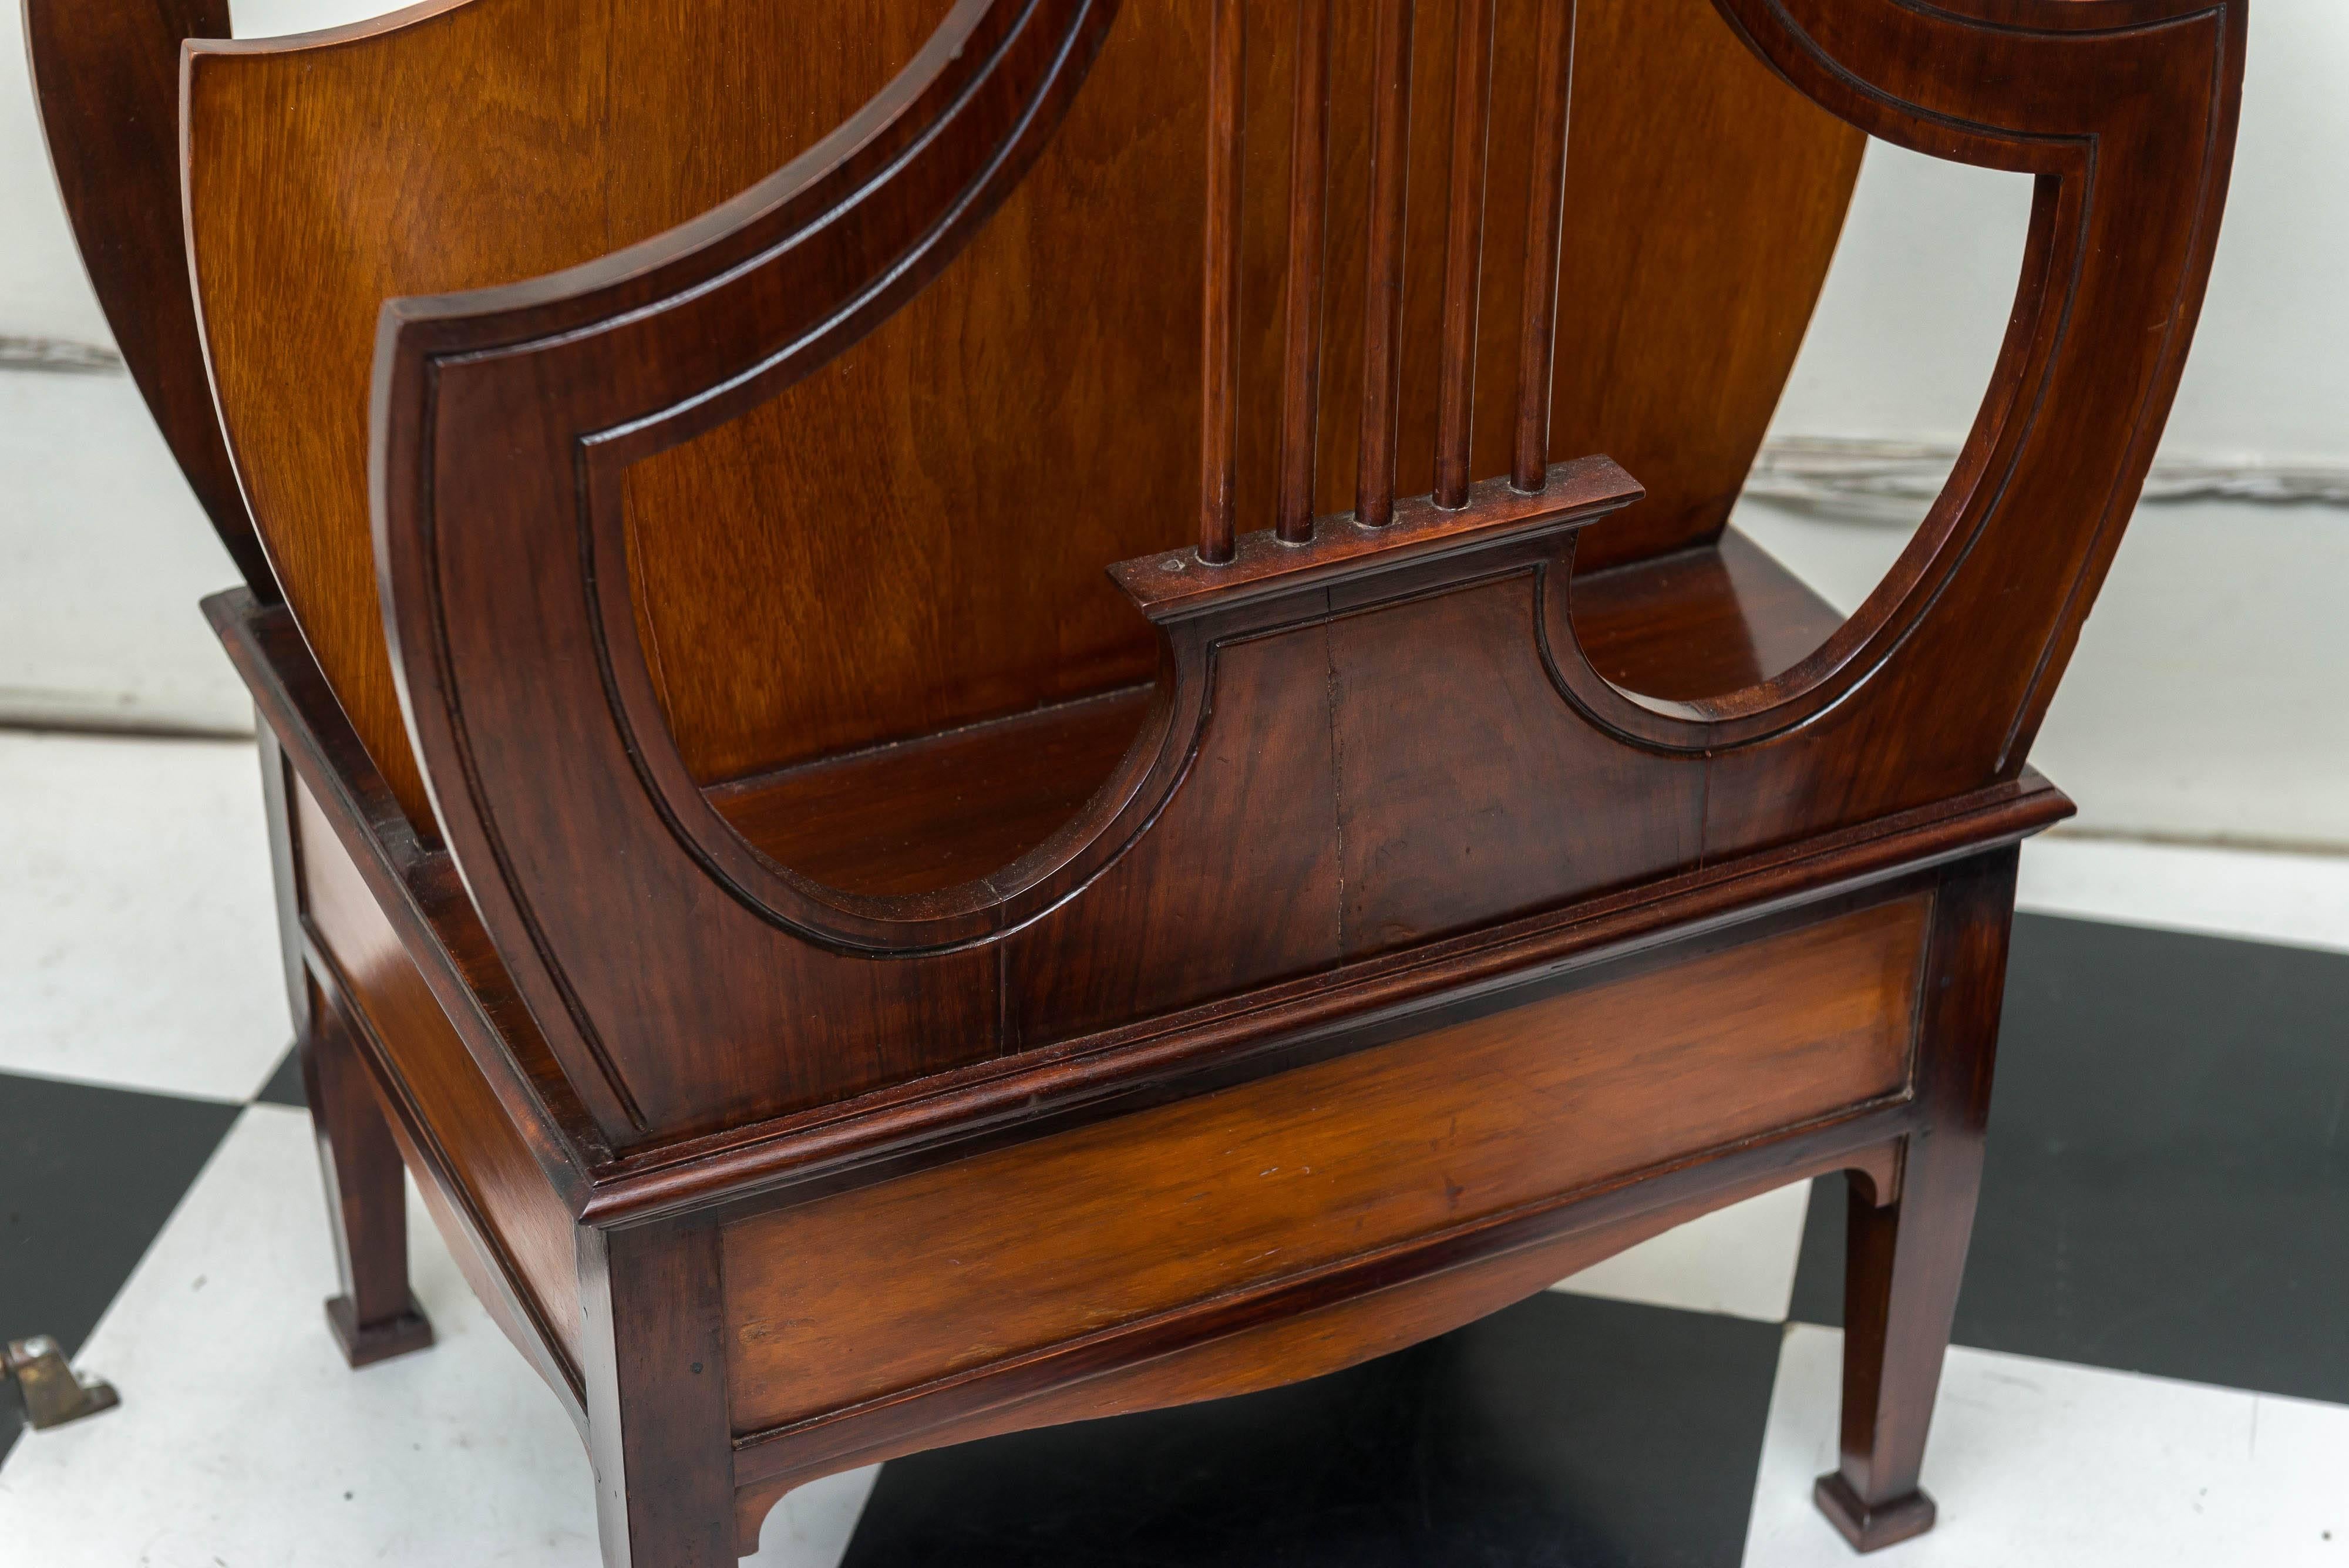 Late 19th century English rosewood lyre form music/folio stand. Two large compartments, fixed base and a very strong build. Compartments are 22.25 inches wide x 6.25 deep x 18 inches height. Incised carved details above a panel and frame base with